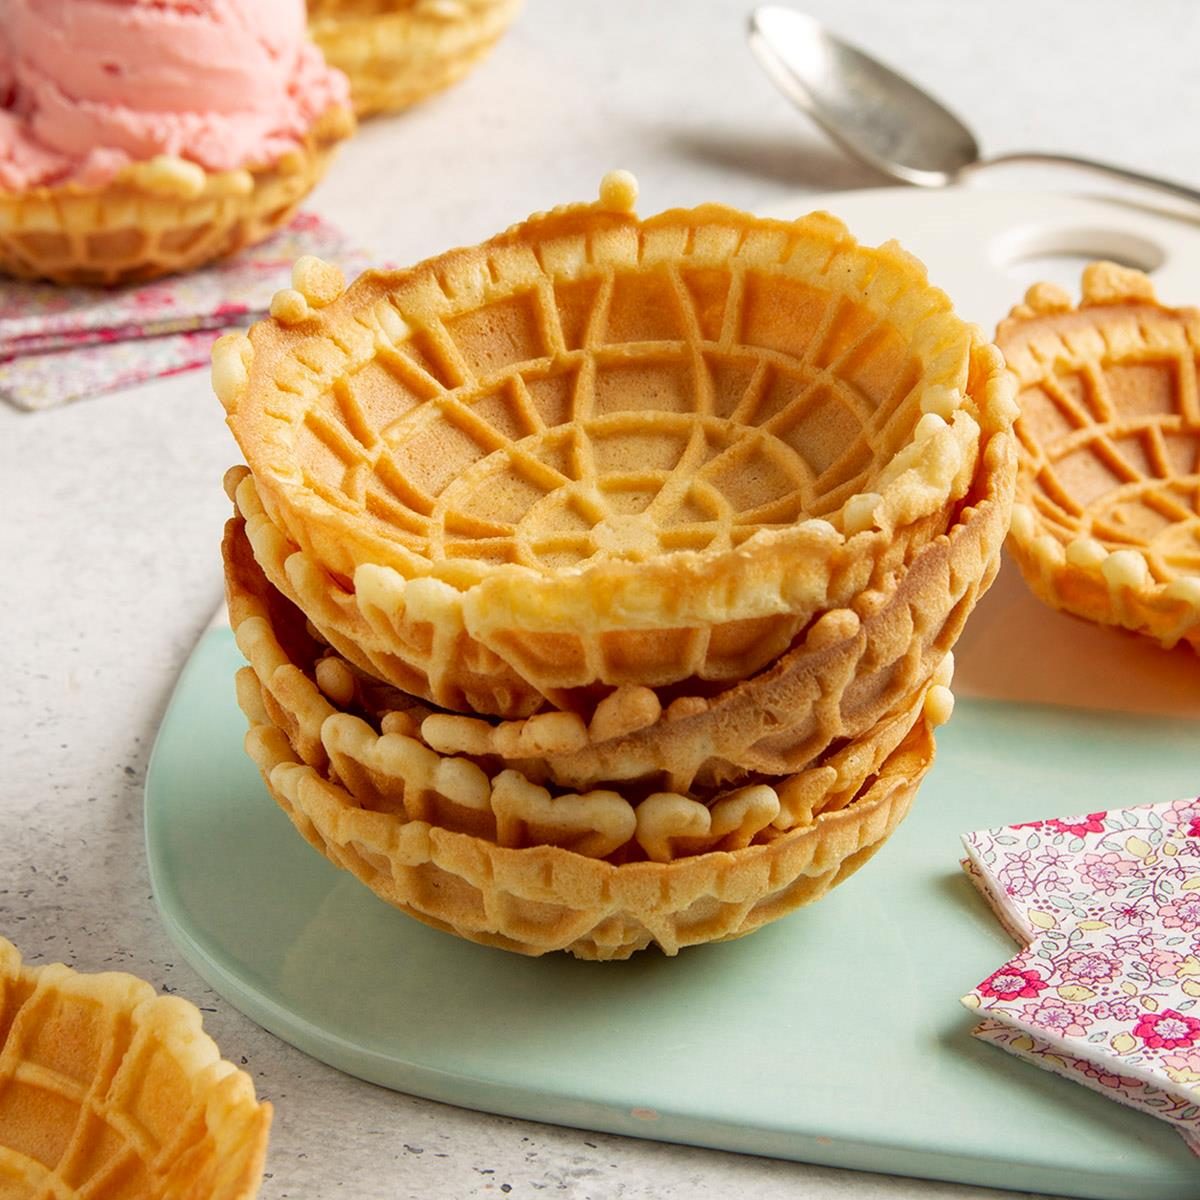 TIP OF THE DAY: Waffle Bowls (Ice Cream Cone Cups)